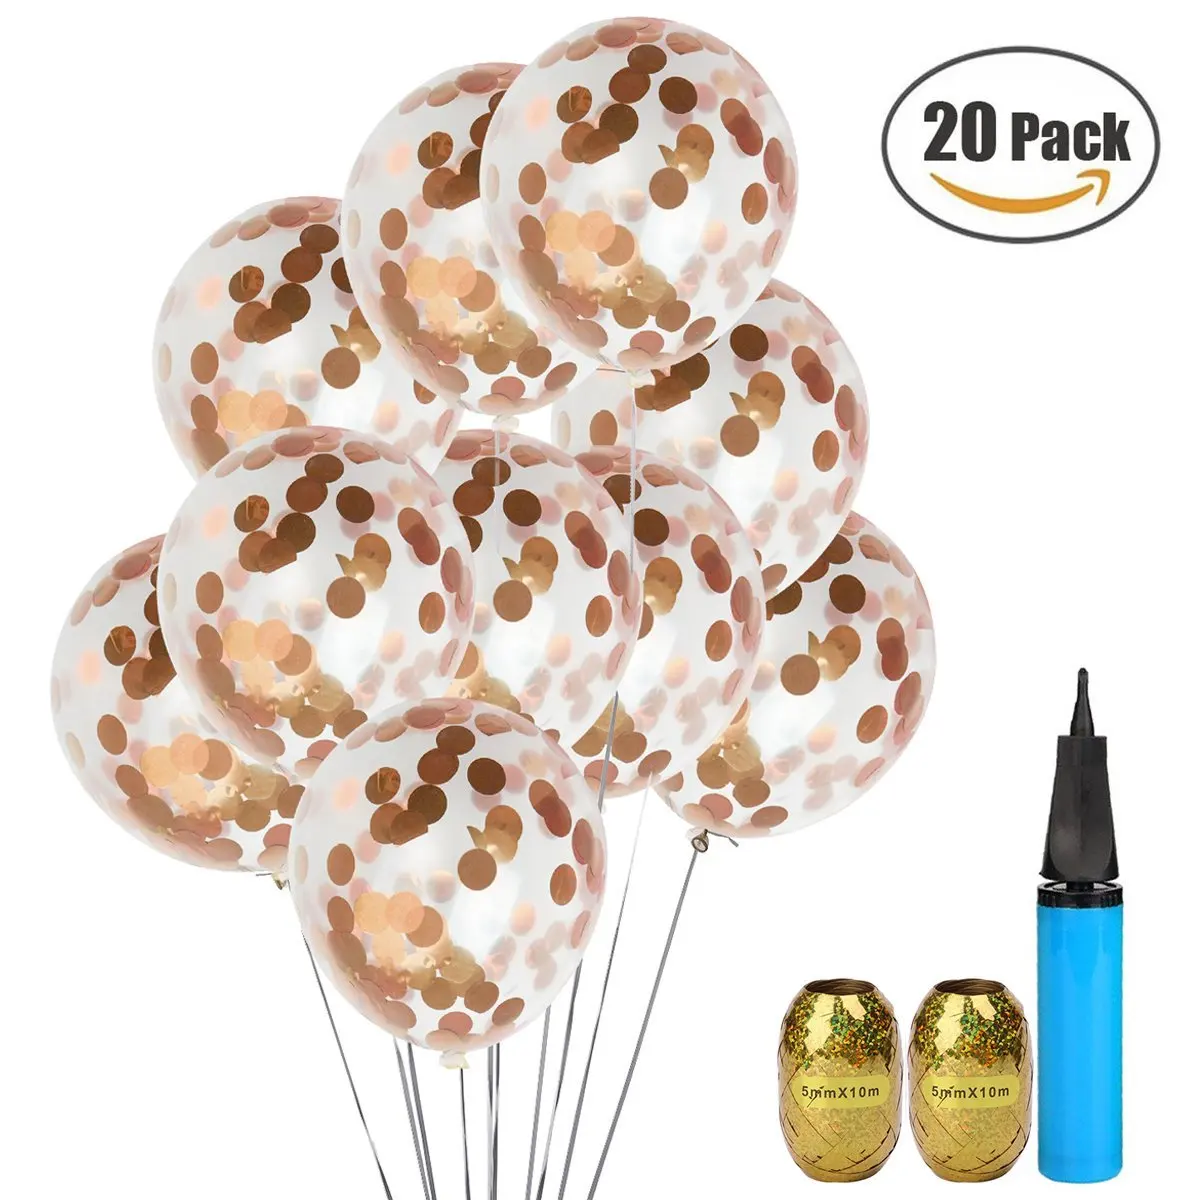 and Events Balloons Decoration Long Balloons Spiral Latex Balloons with Pump Birthdays 100 Pack 48-inch Latexs Long Balloons for Parties